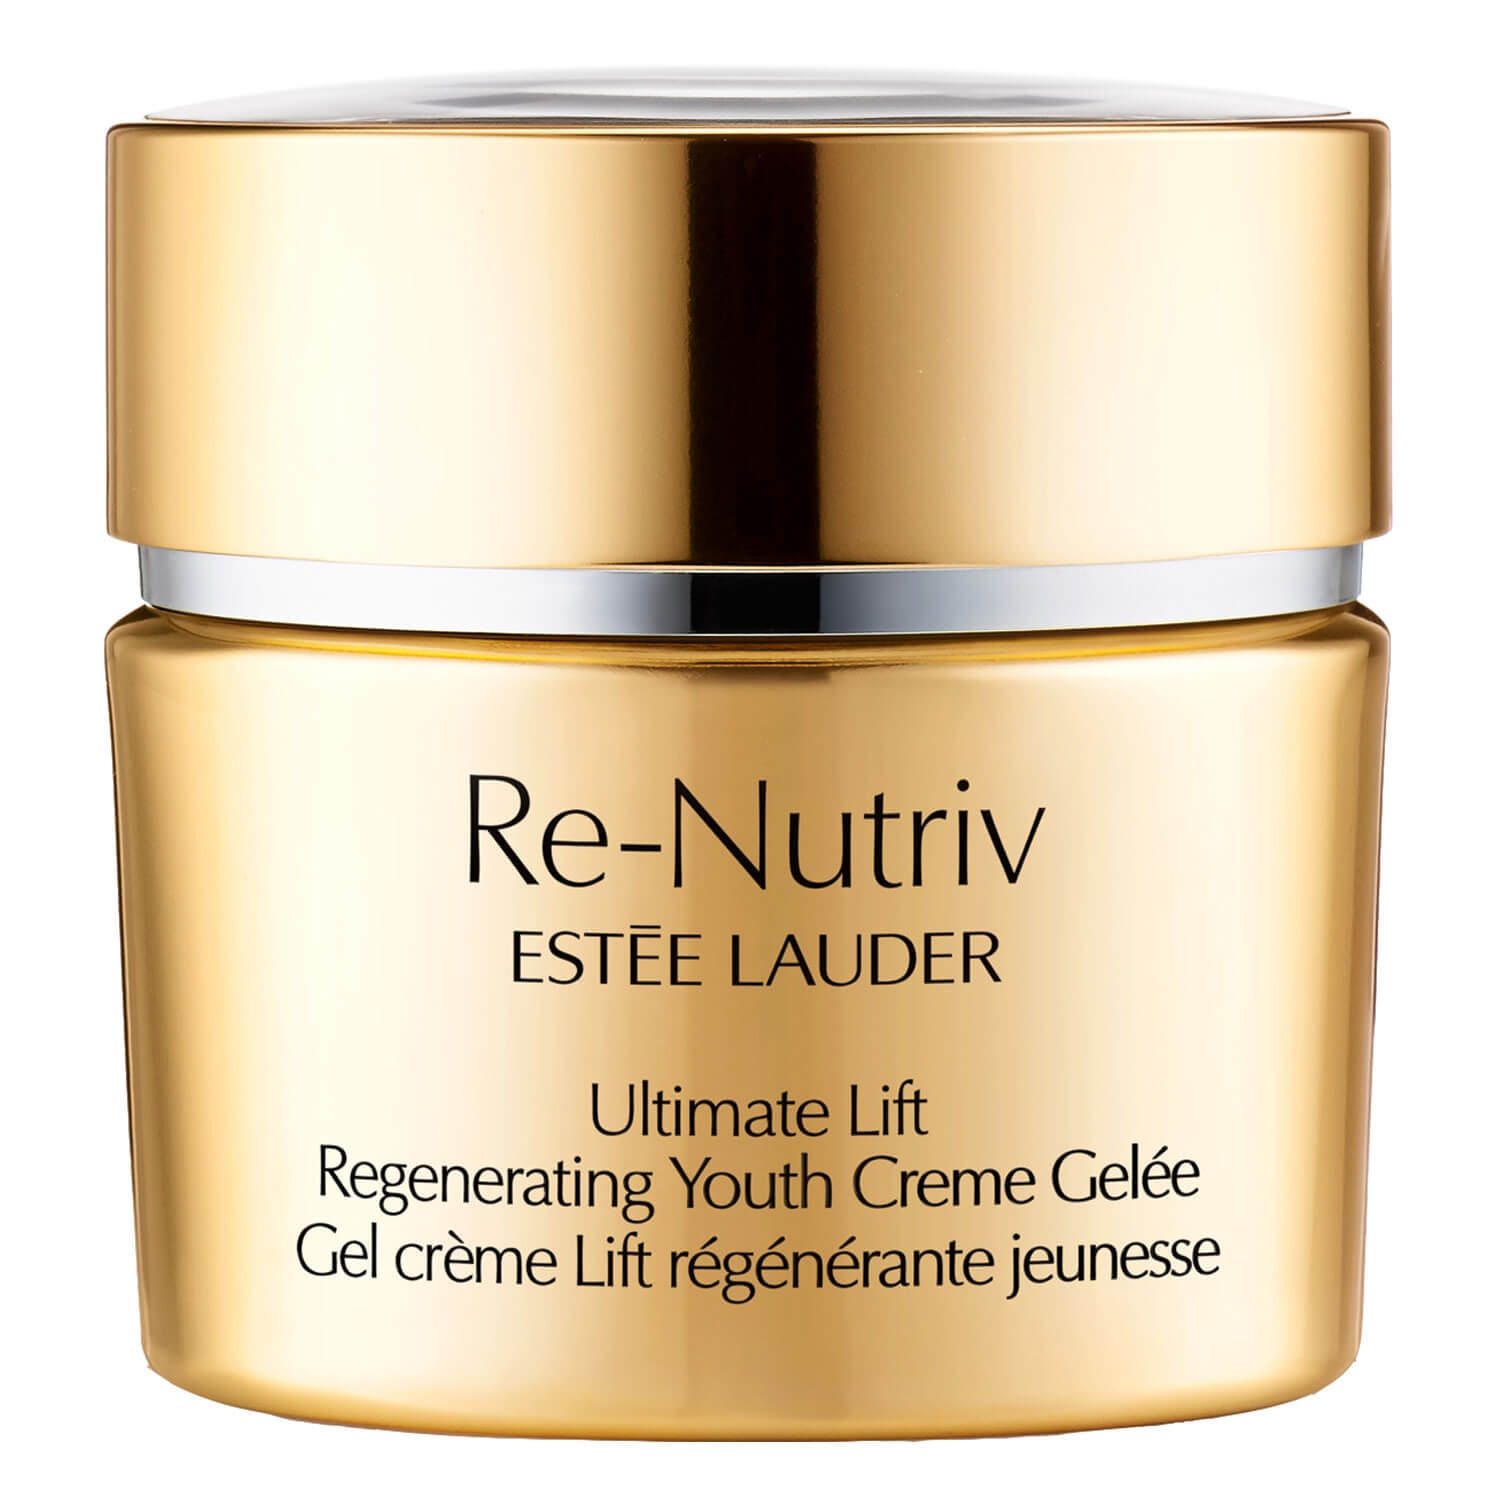 Product image from Re-Nutriv - Ultimate Lifting Regenerating Youth Creme Gelée